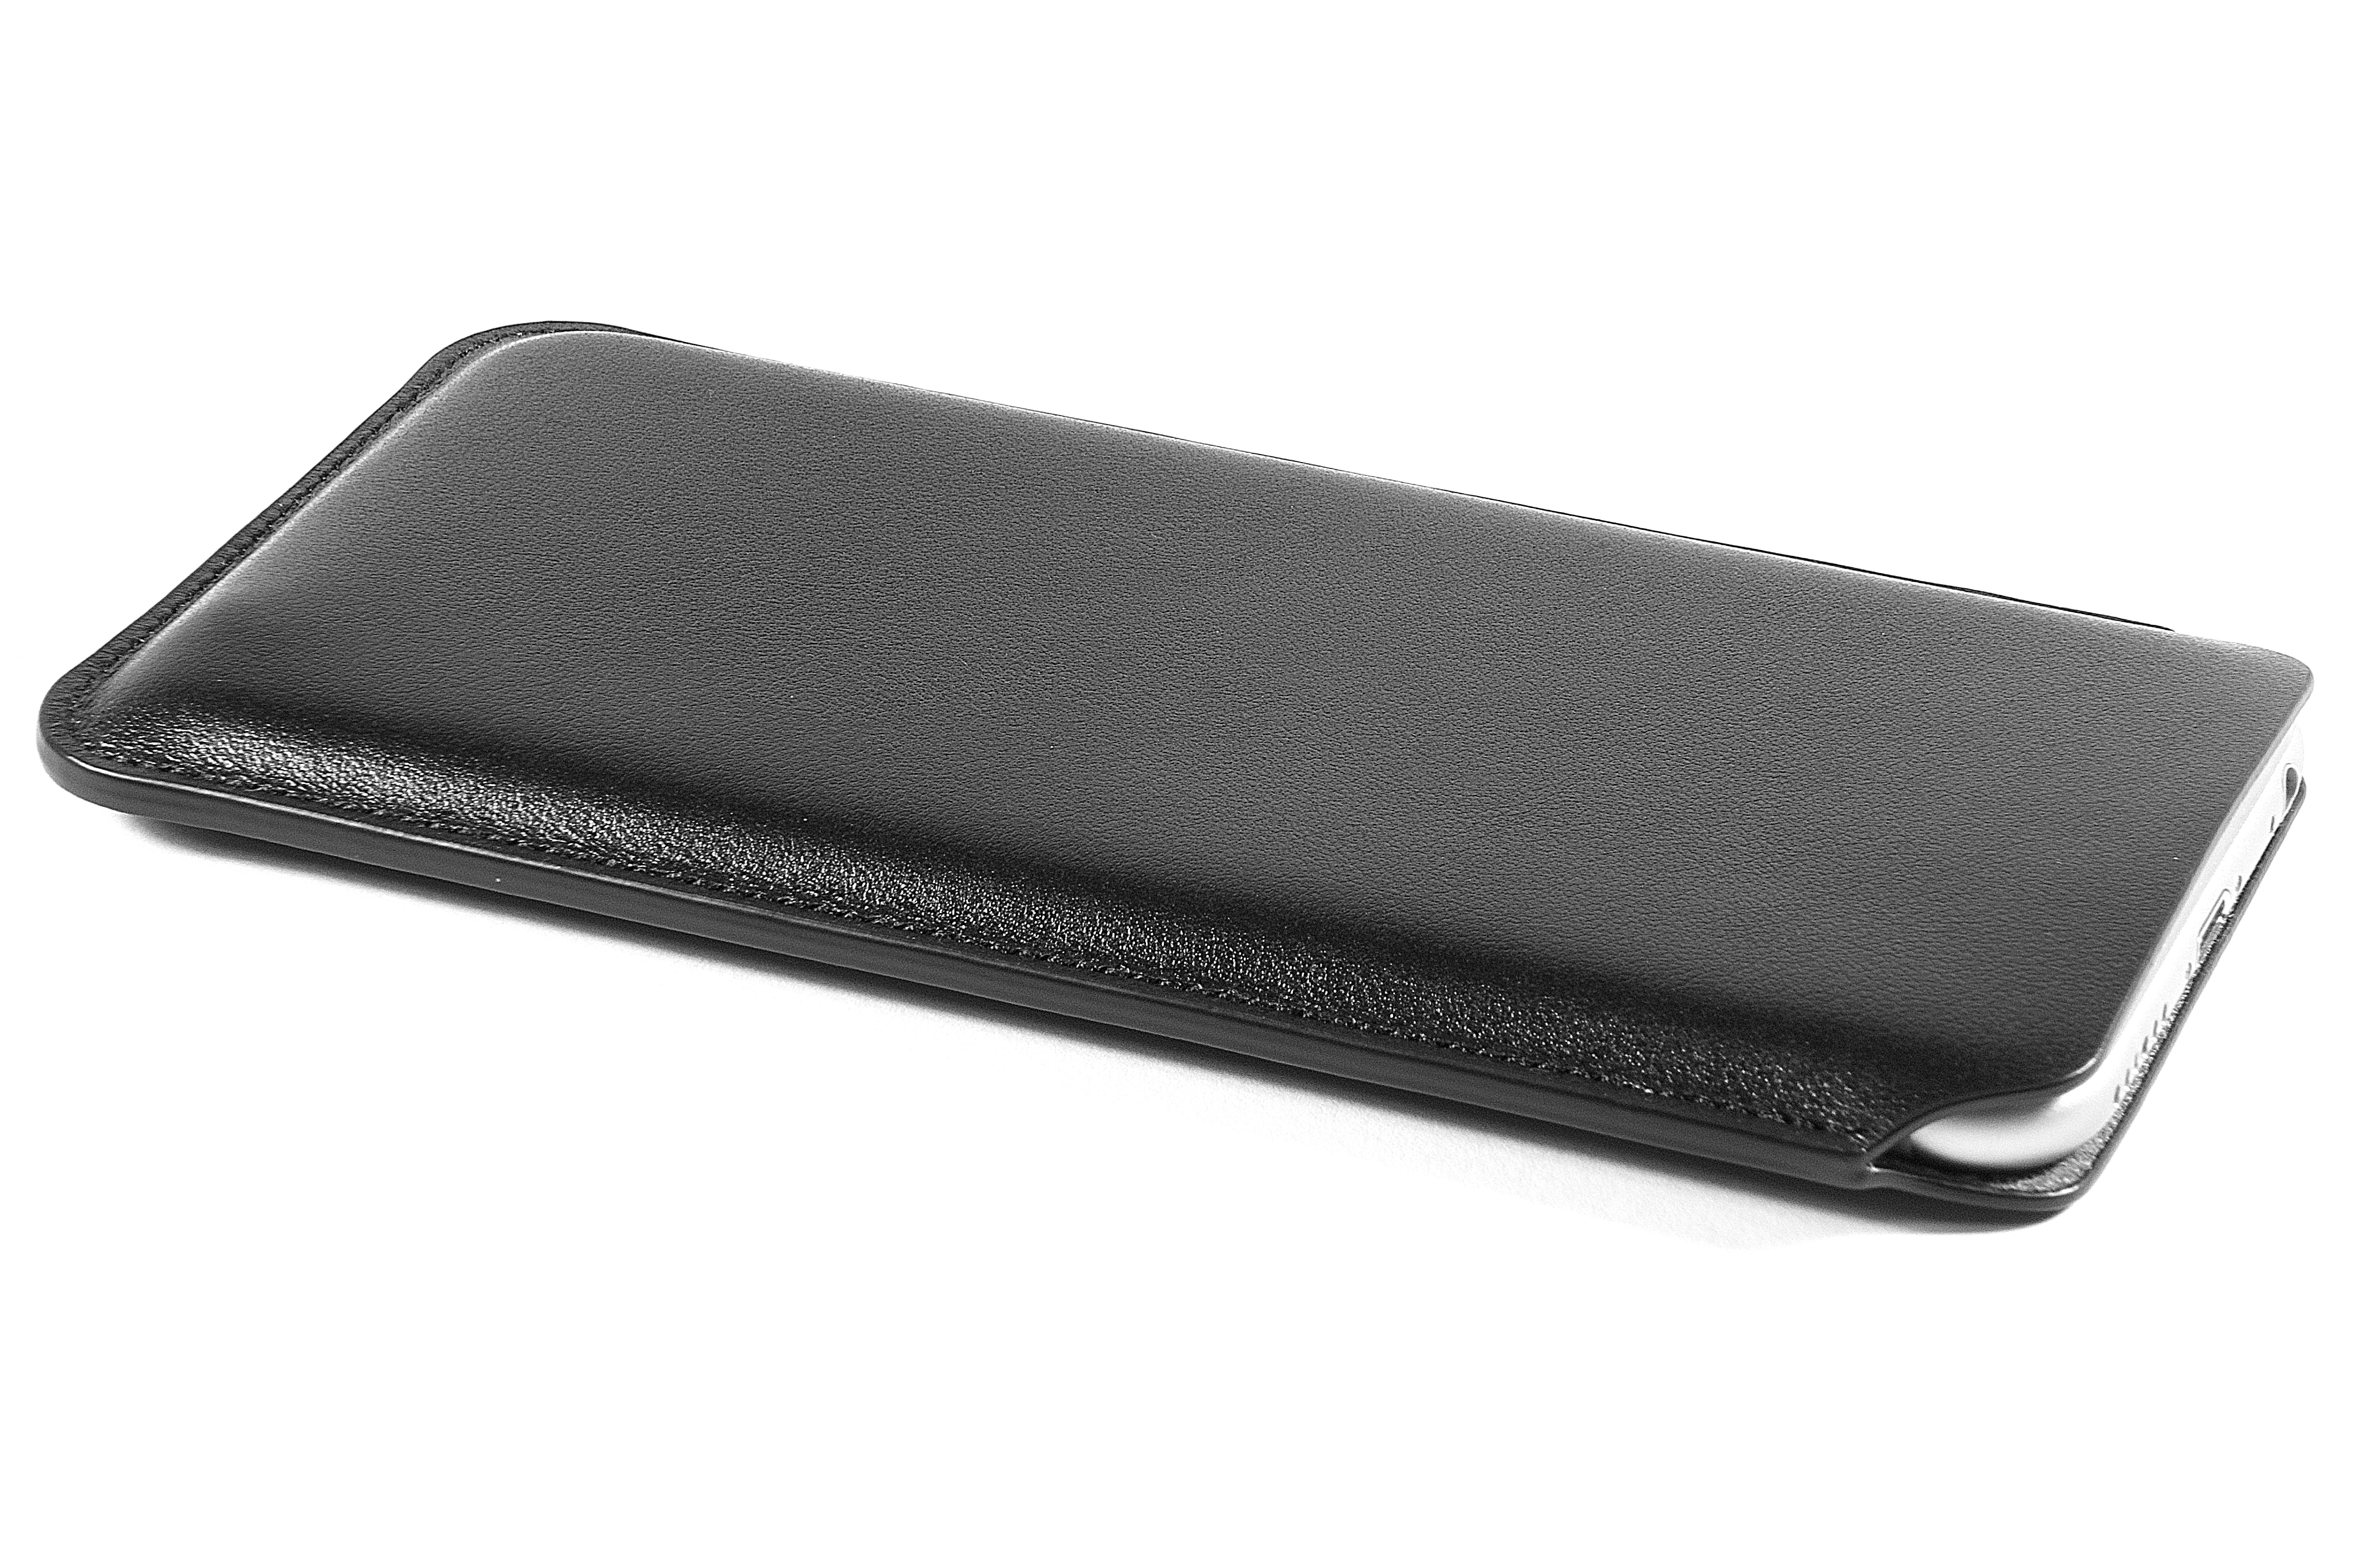 Skinny Fit Iphone Se Leather Case Sleeve Pouch Cushcase